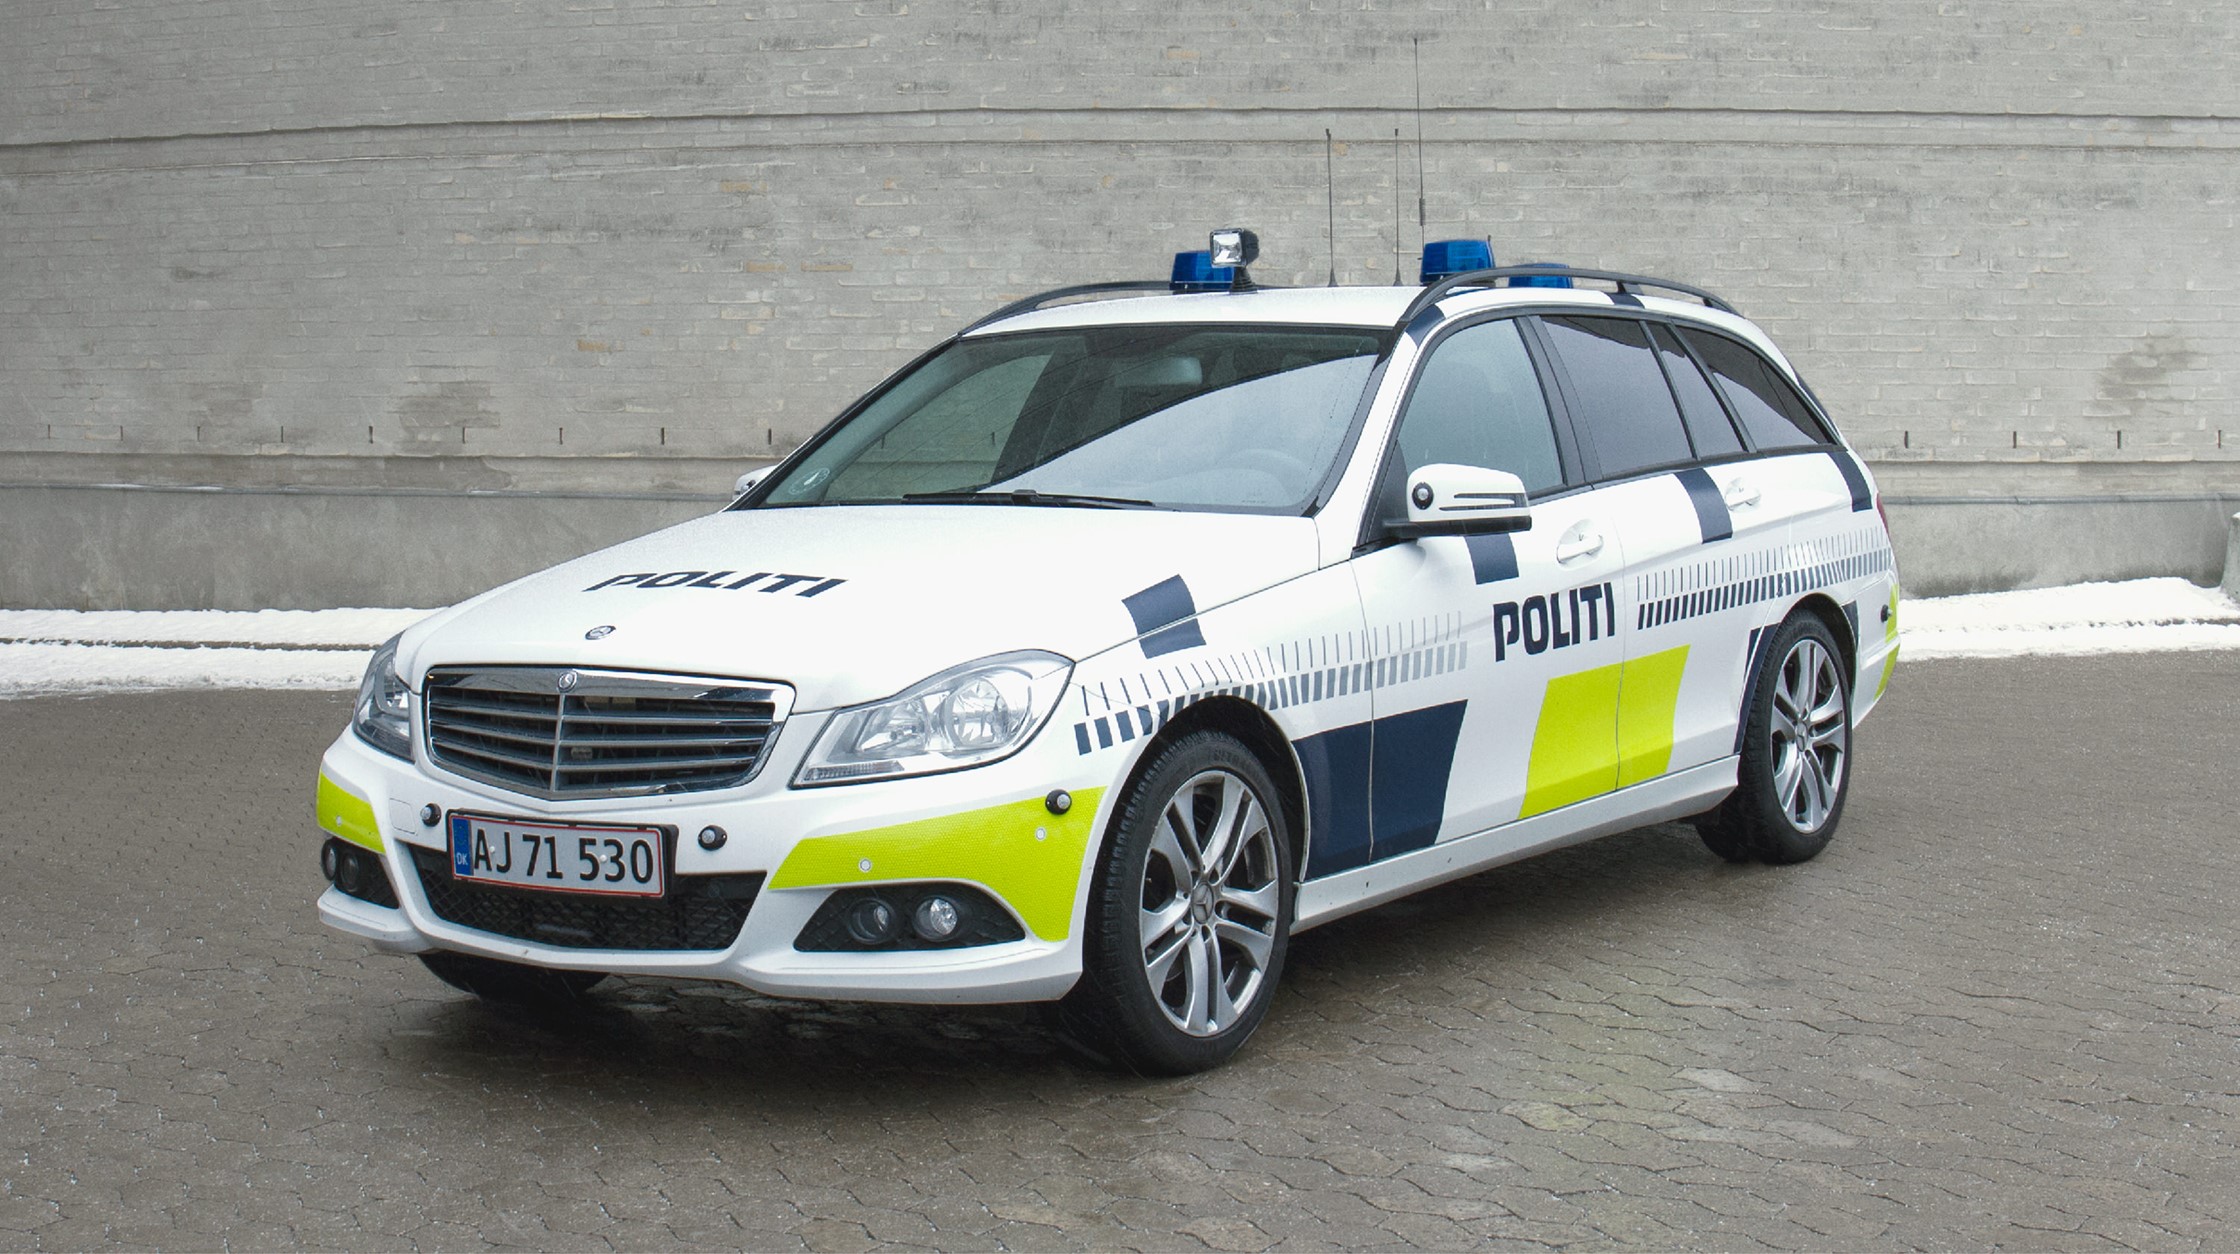 Ciencias Sociales Salida Interpersonal Politiet – The National Danish Police - Fonts In Use